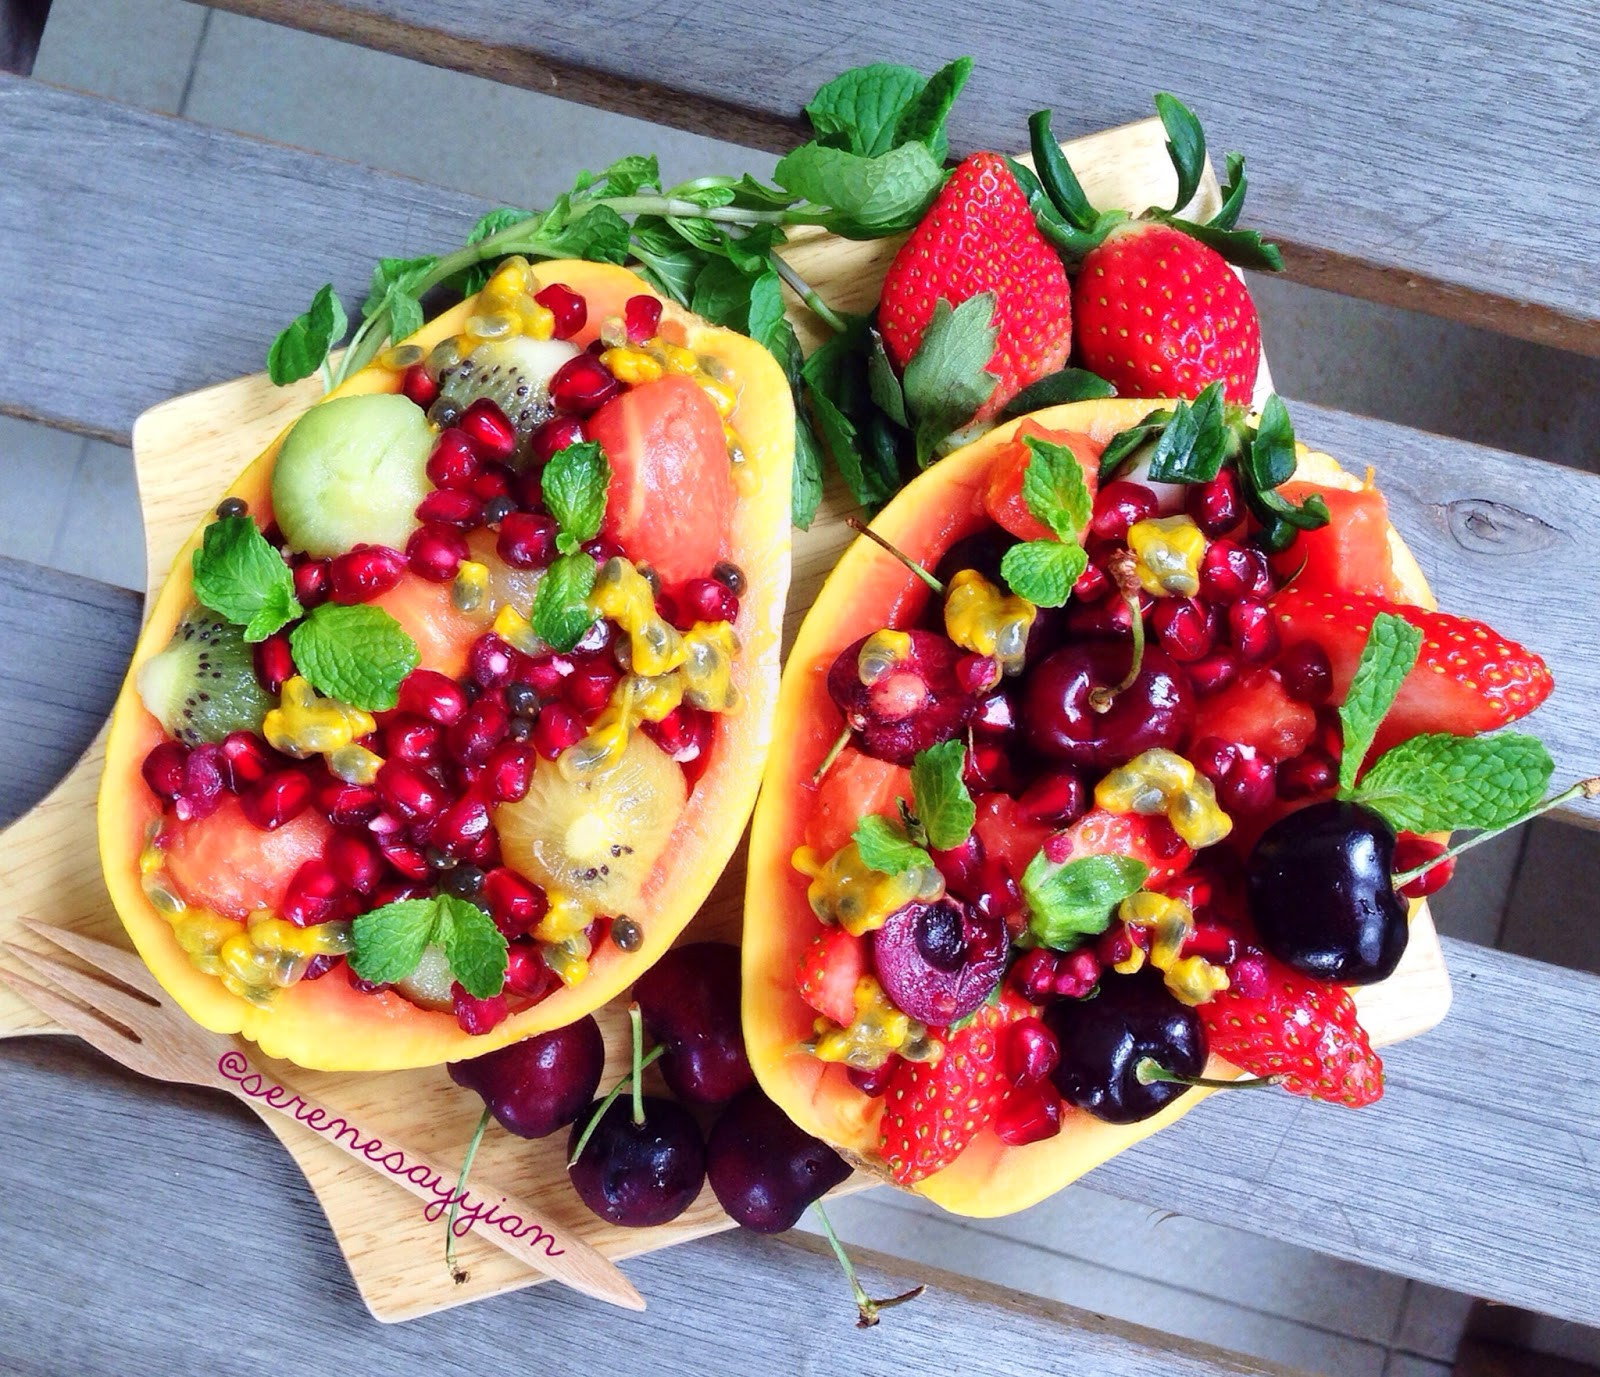 Fruit Breakfast Recipes
 The 10 BEST Raw Food Breakfast Recipes Bloom for Life